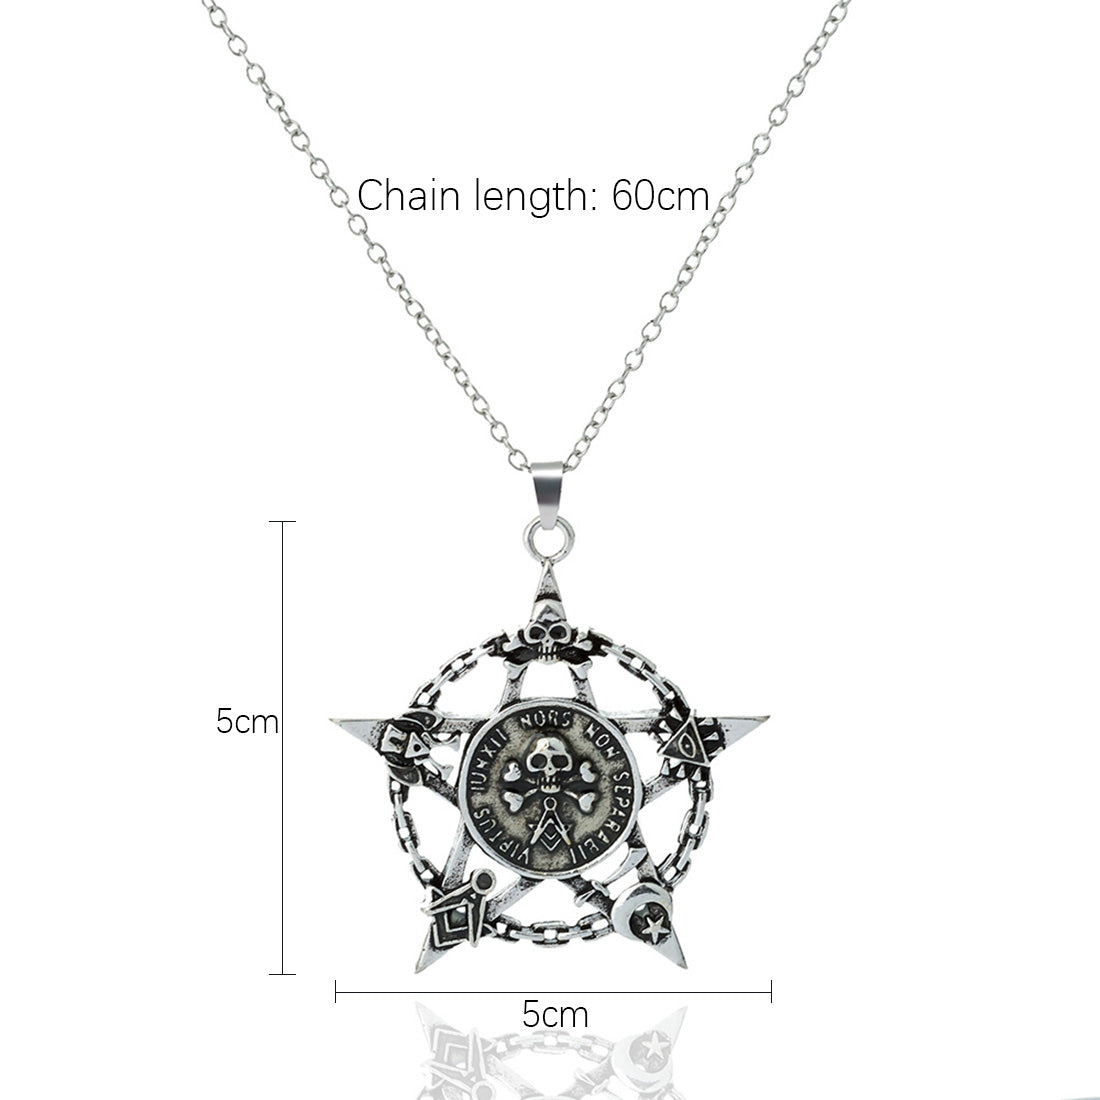 Vintage Star Skull Pendant Necklace Luminous Charm Silver Color Choker Necklace Punk Style Jewelry For Women Glow In The Dark